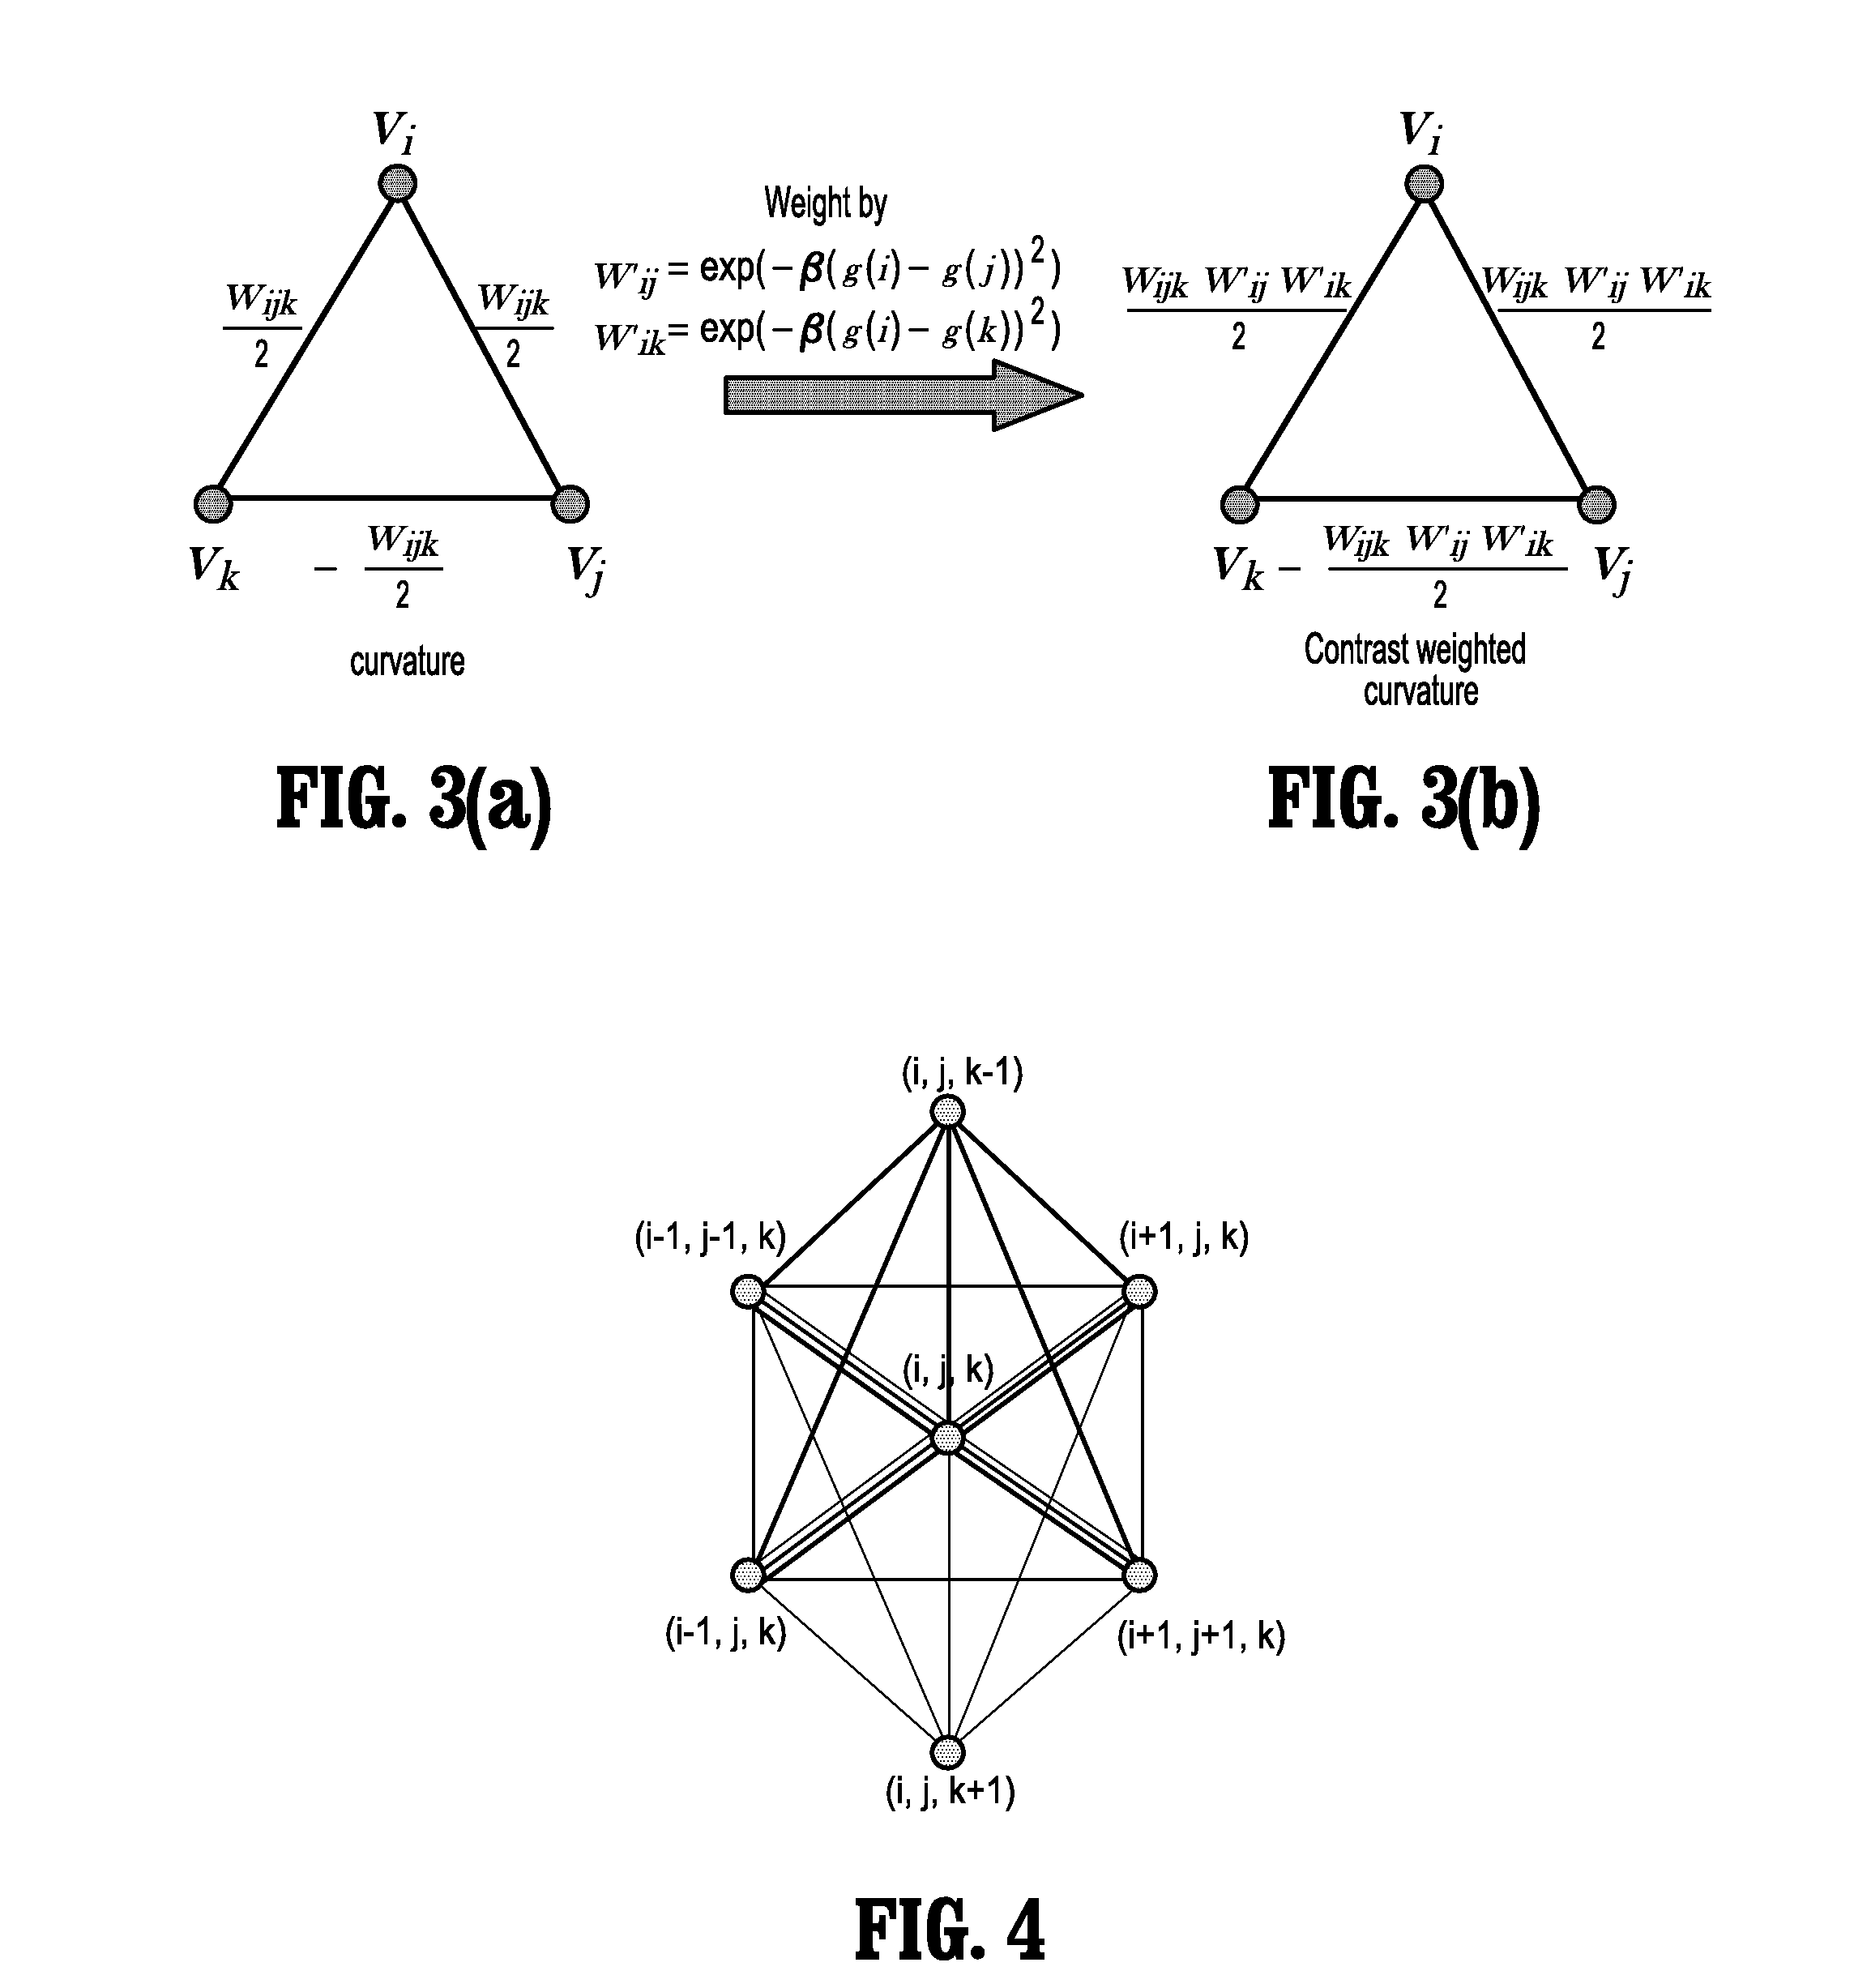 System and Method for Image Segmentation by Optimizing Weighted Curvature